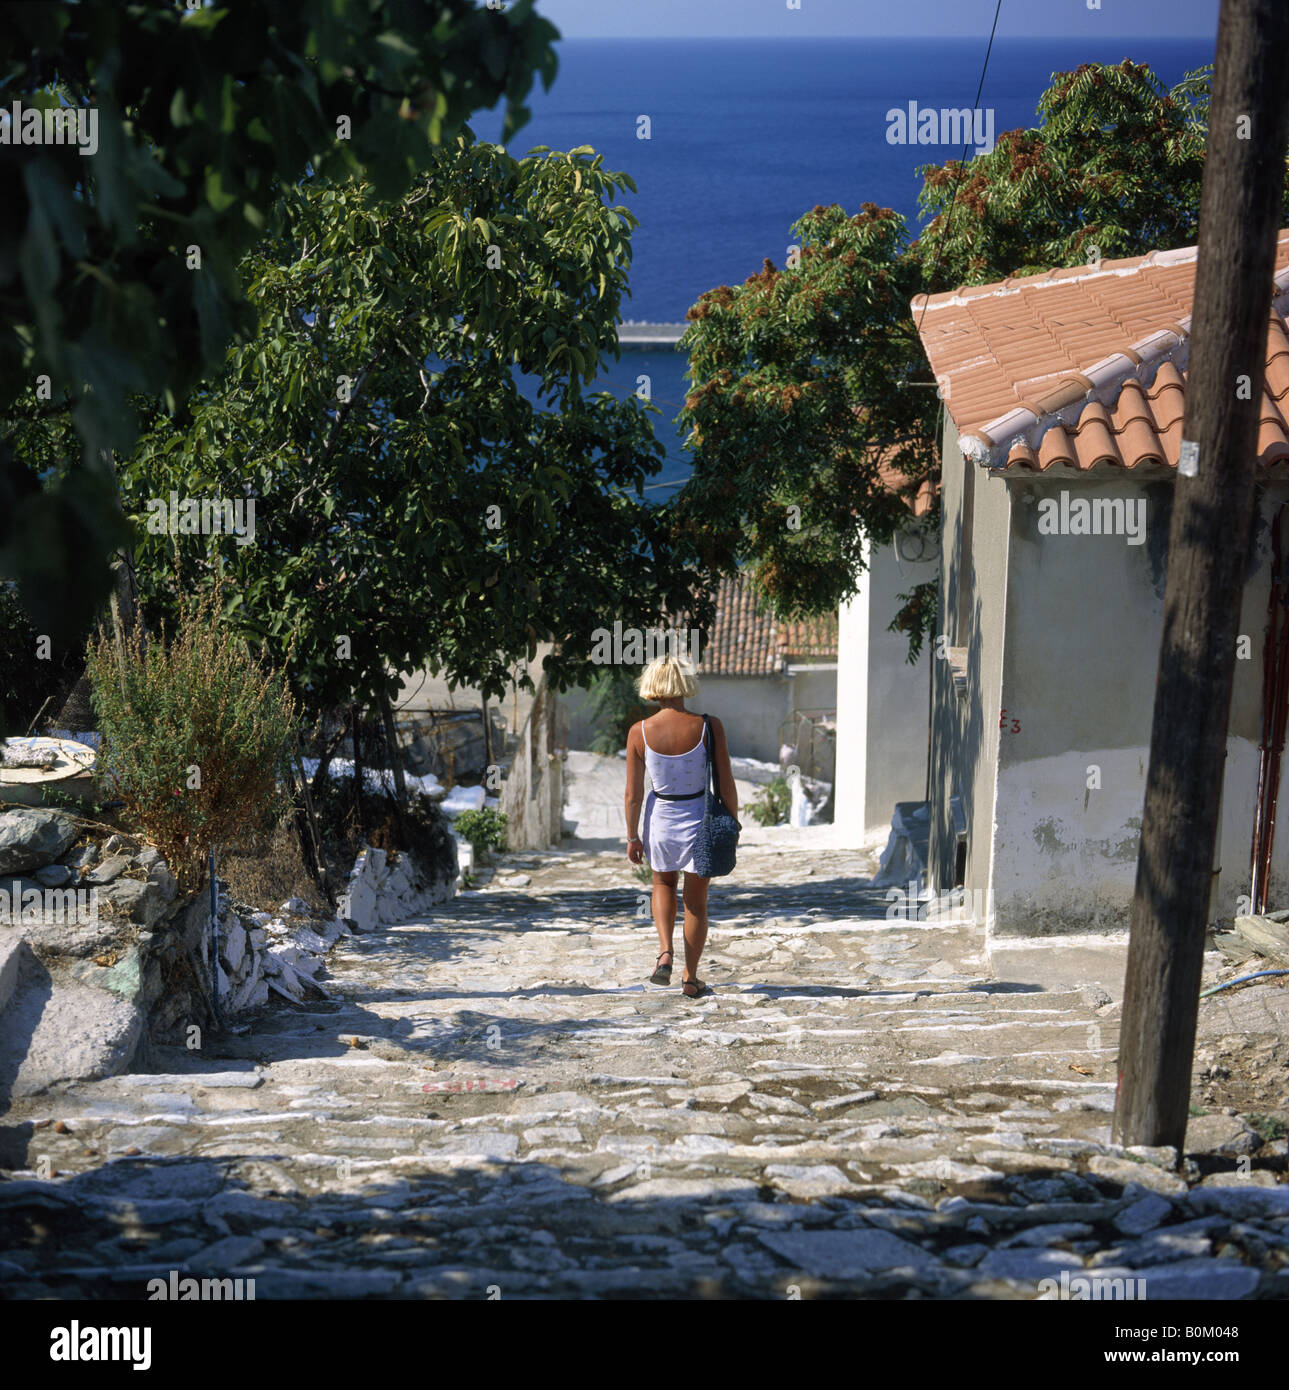 Aegean island. Cobbled street steps. Houses. View to sea. Woman walking. Stock Photo